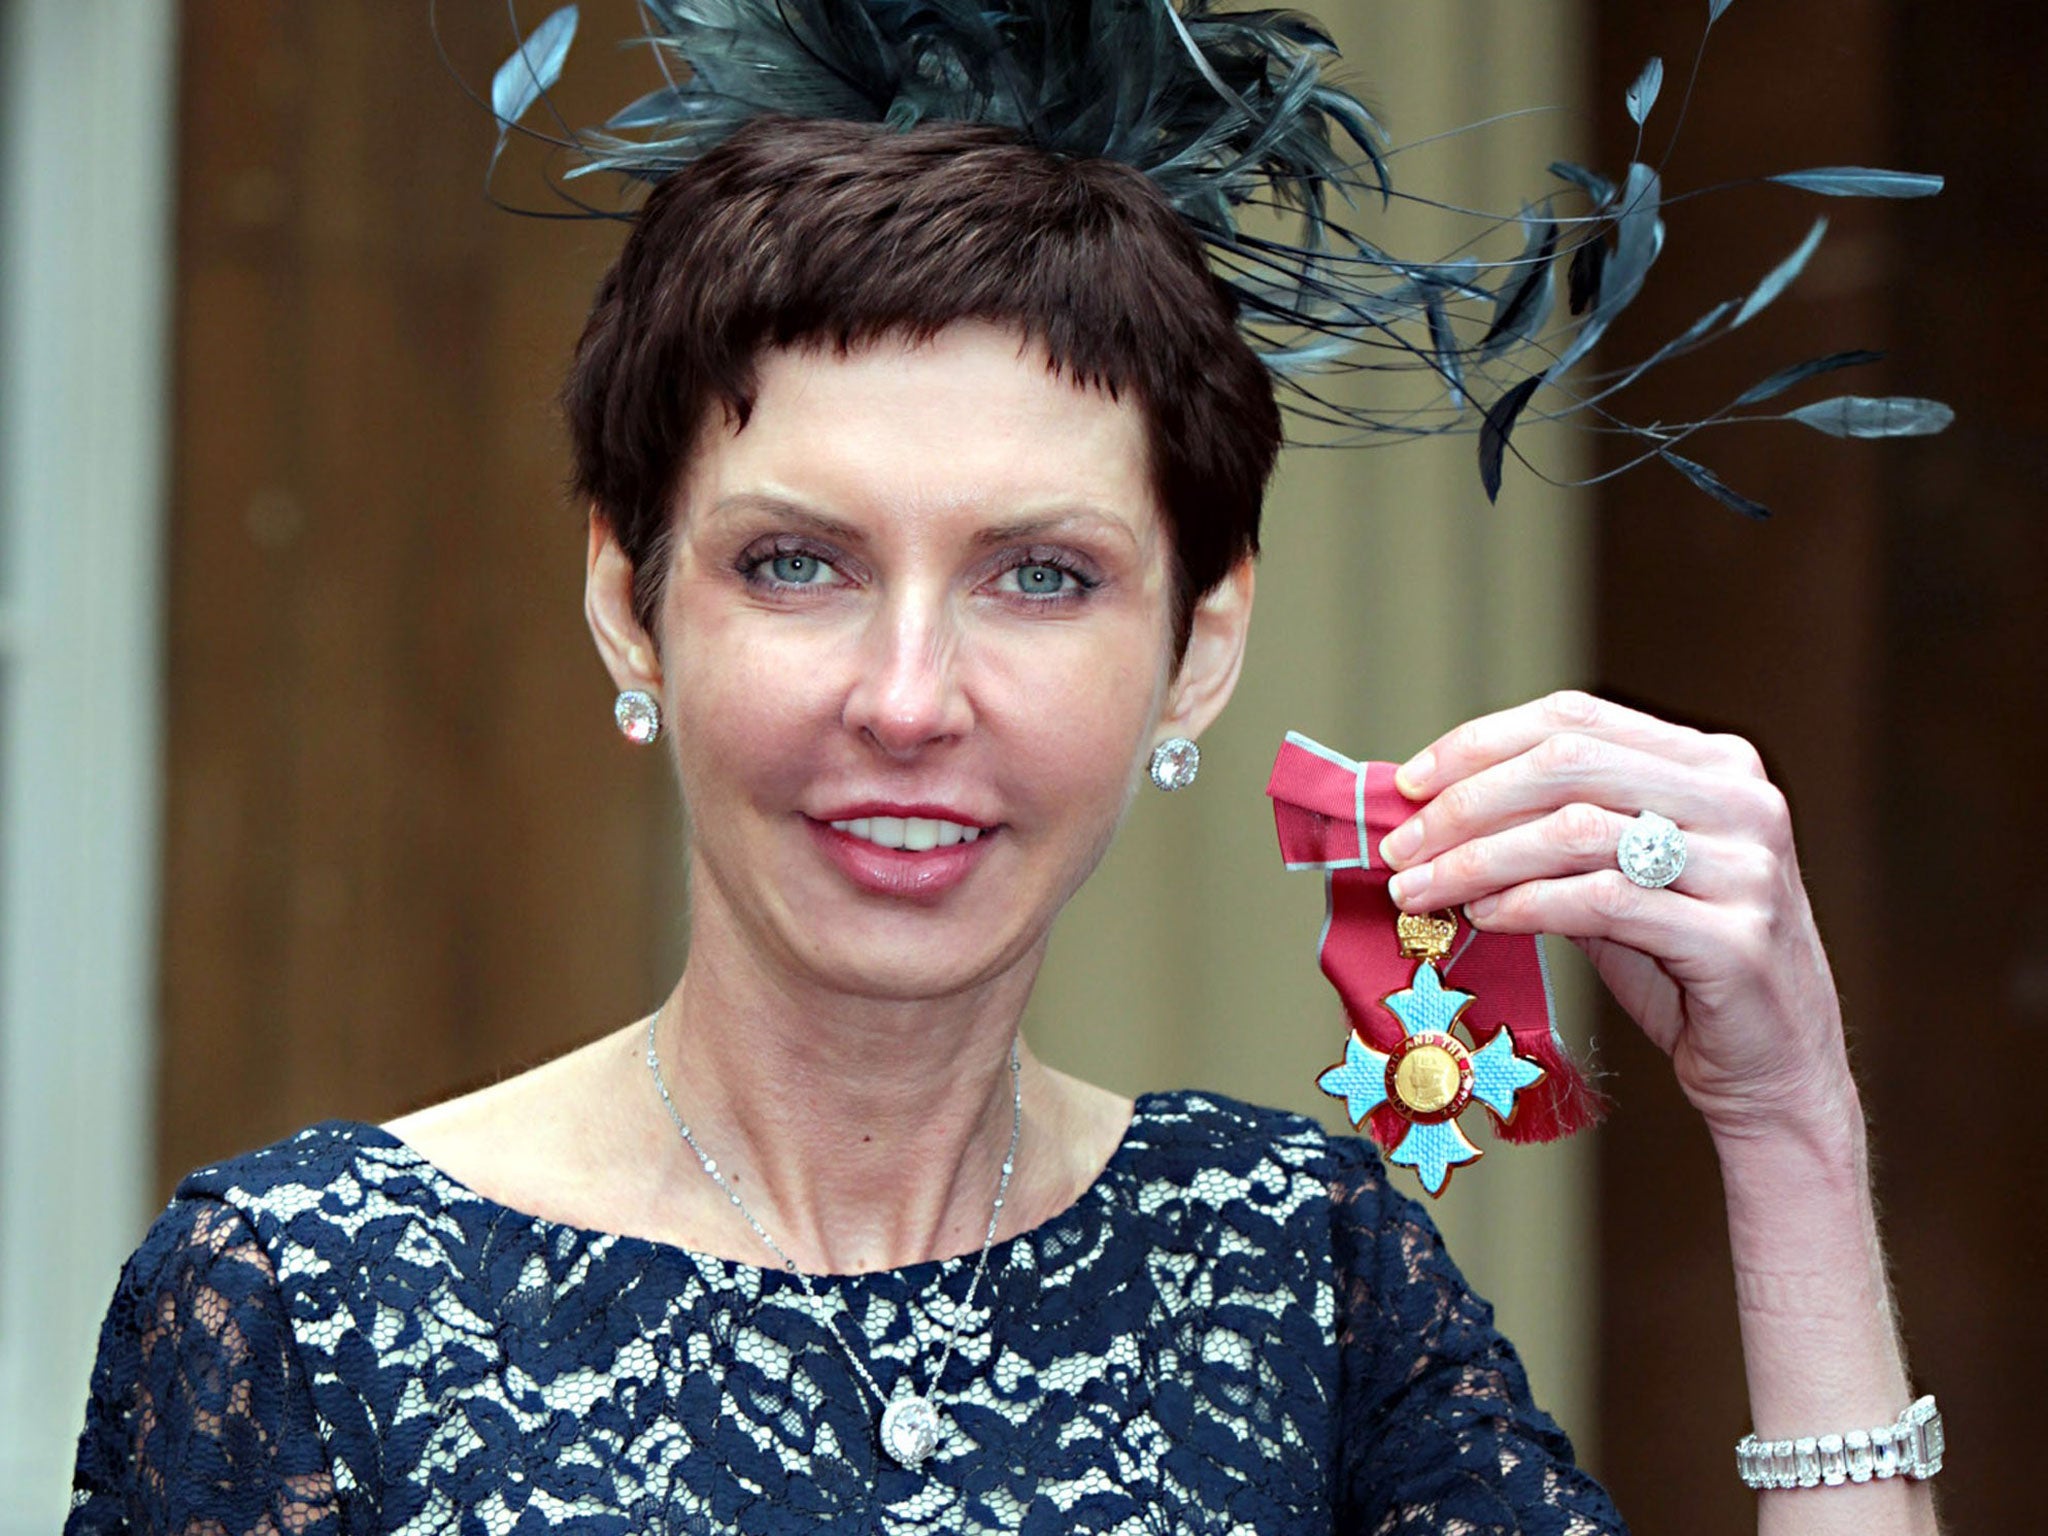 Bet365 boss Denise Coates and her family were the UK’s biggest taxpayers last year